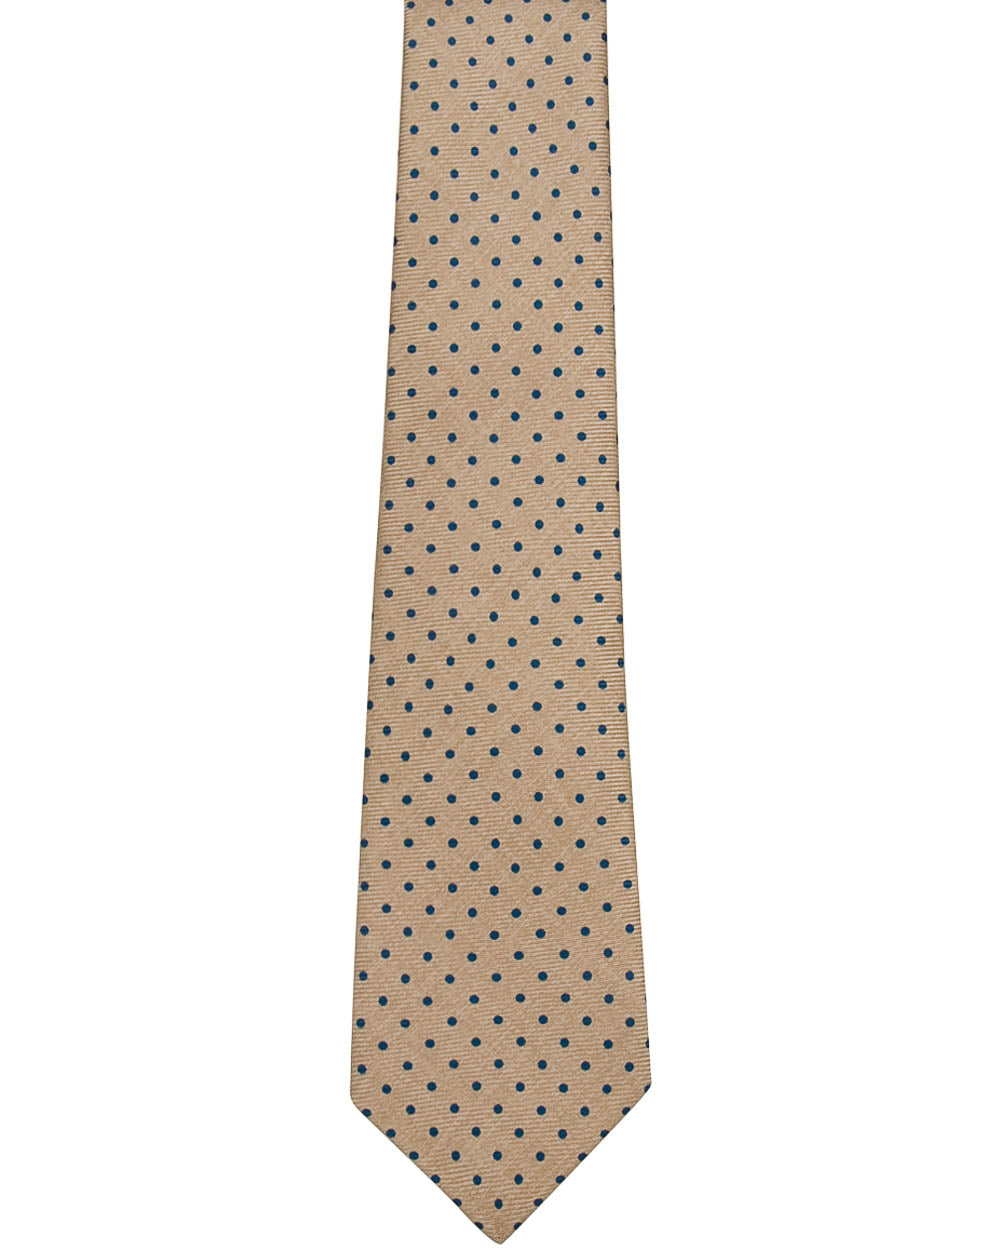 Tan with Mid Blue Dot Tie